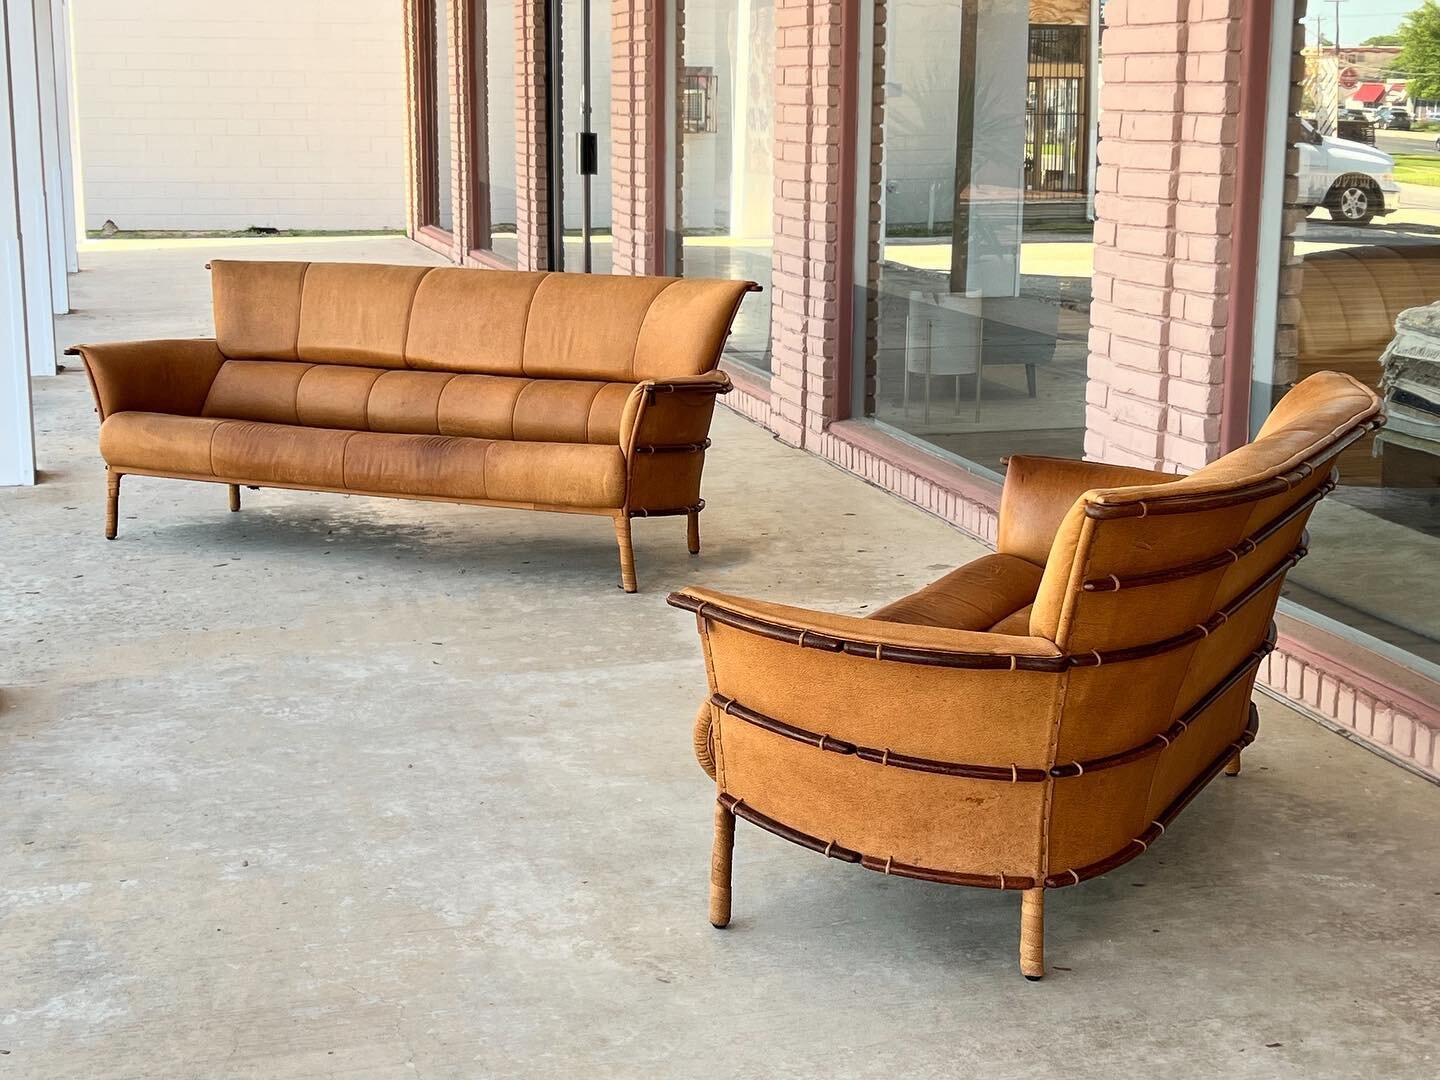 Just in 👌🏻
.
.
A pair of cognac leather &amp; palmwood &ldquo;Navajo&rdquo; sofas by Pacific Green, c. 1990s. Each sofa is in original condition and shows a beautiful patina. The ribbed palmwood frame replicates the canoe building techniques of Nat